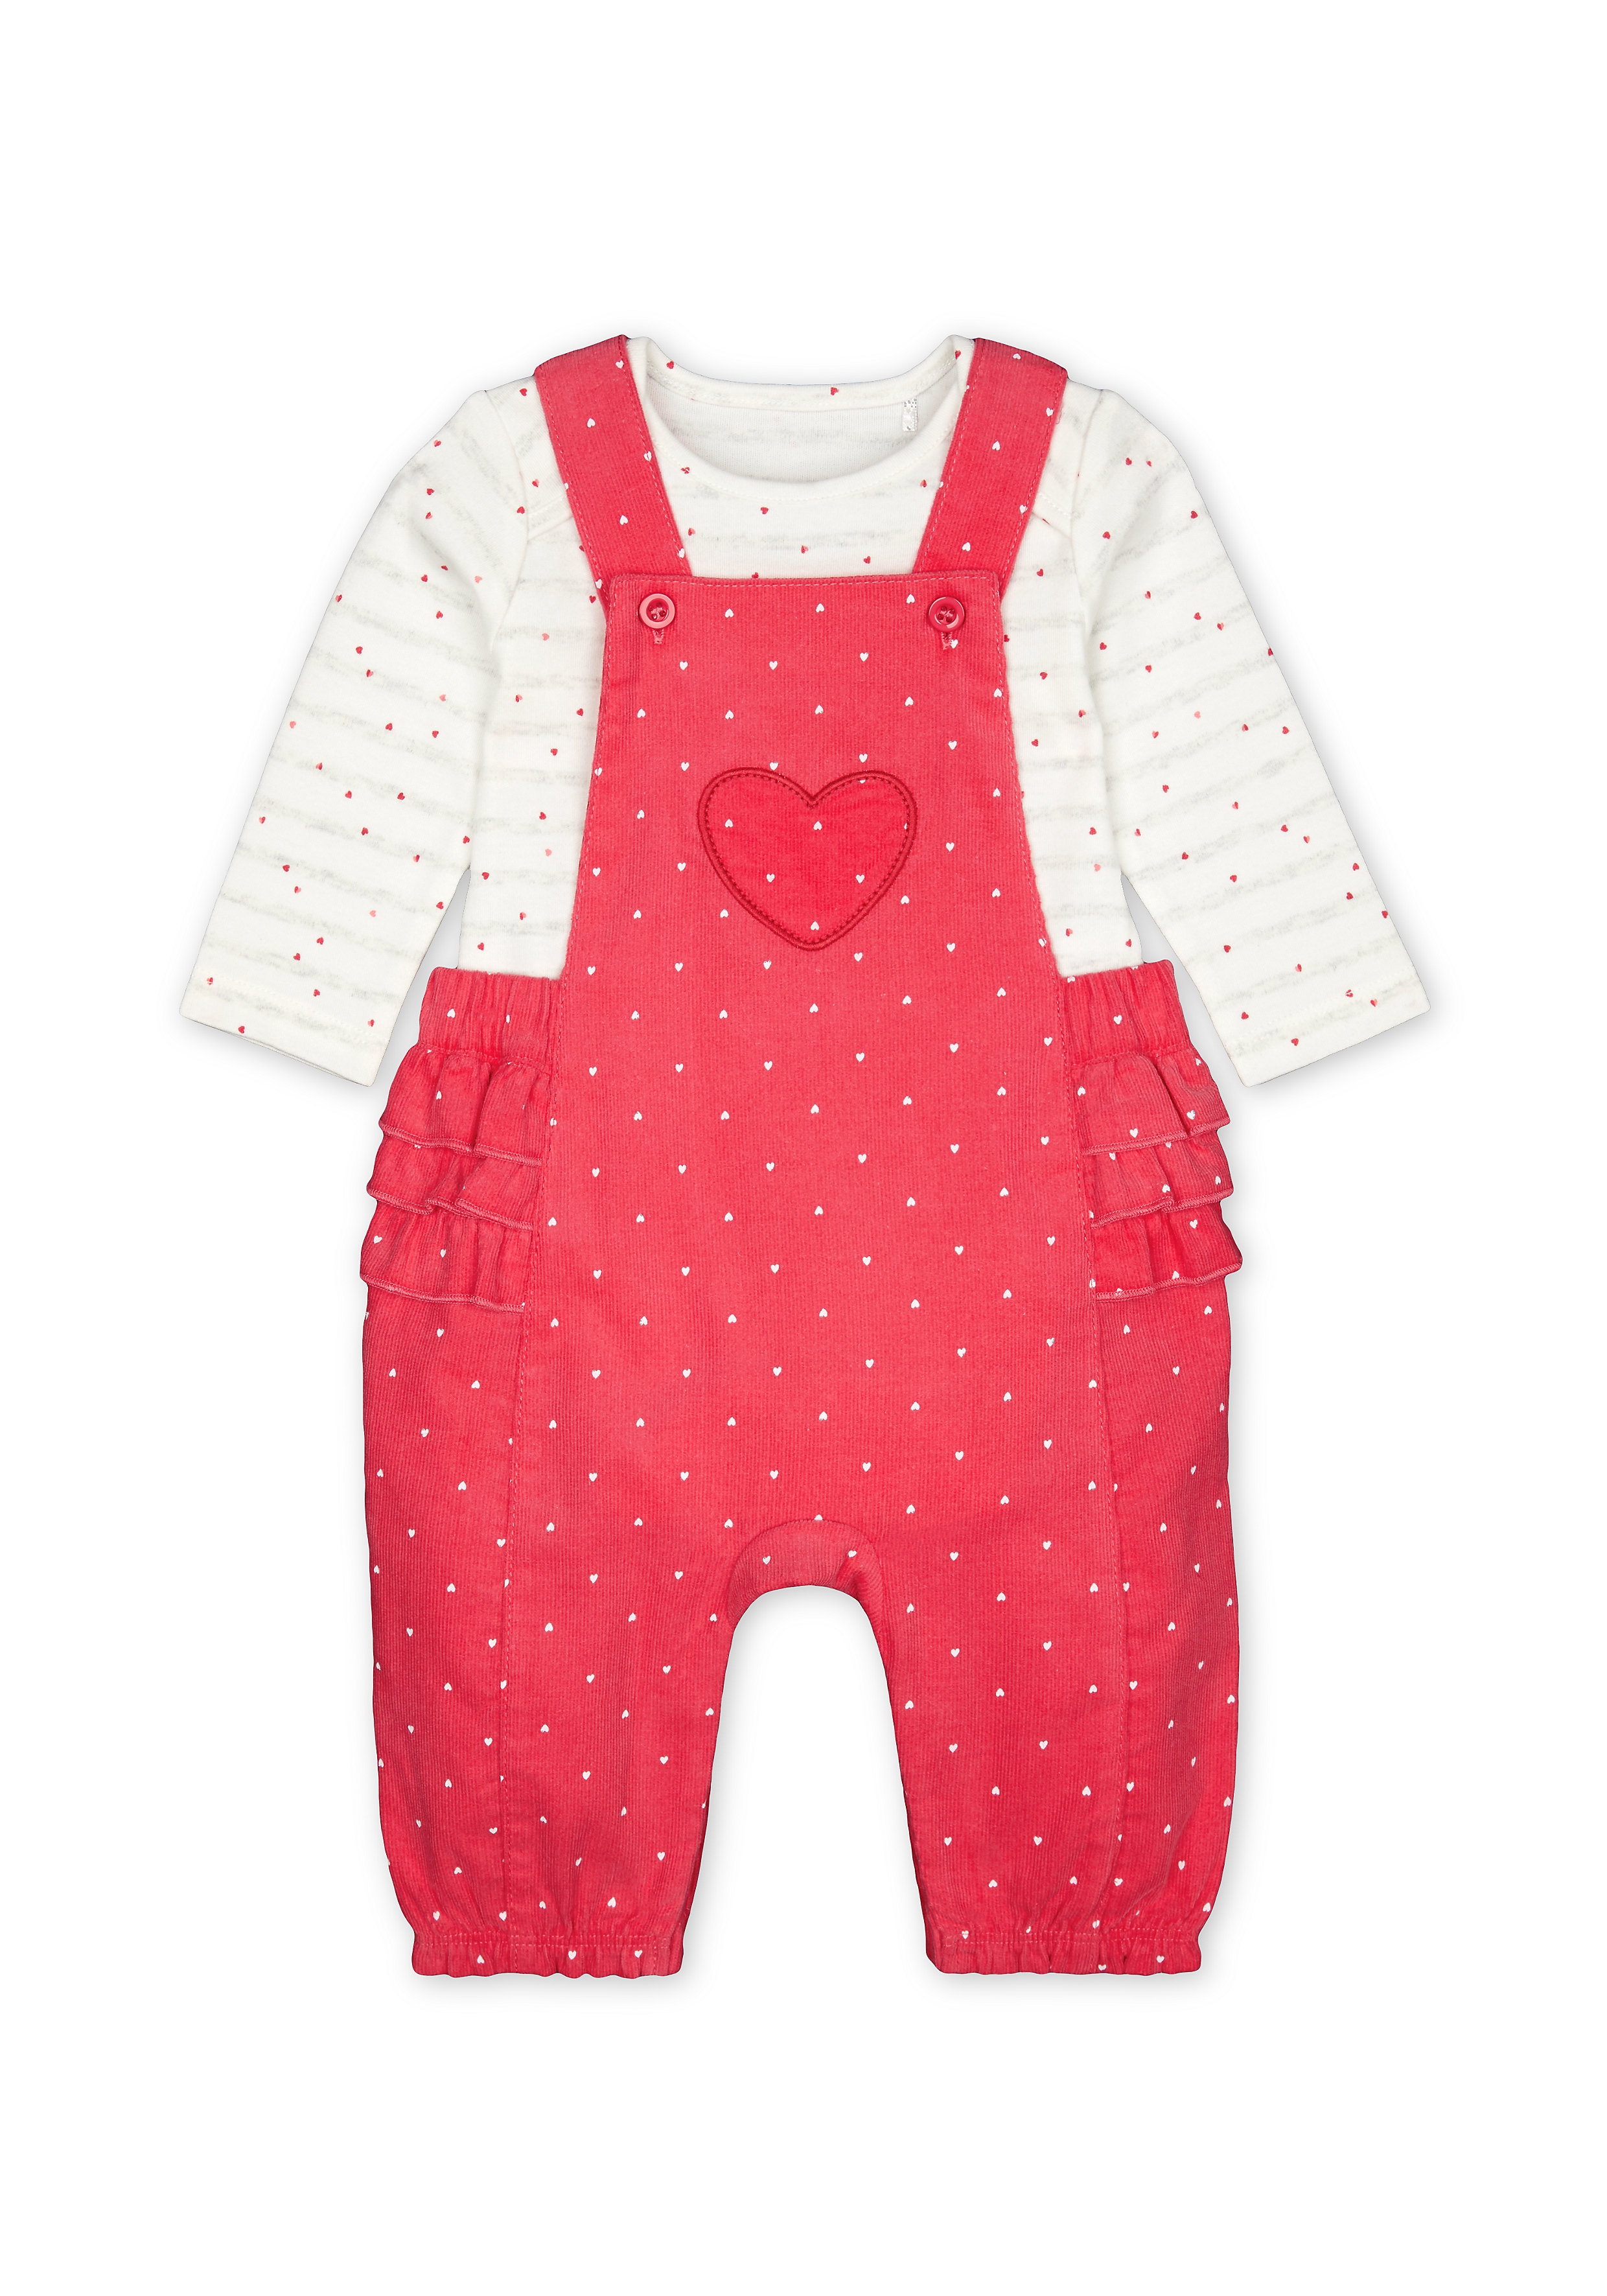 Mothercare | Girls Full Sleeves Cord Dungaree Set Polka Dot Print With Frill Details - Pink White